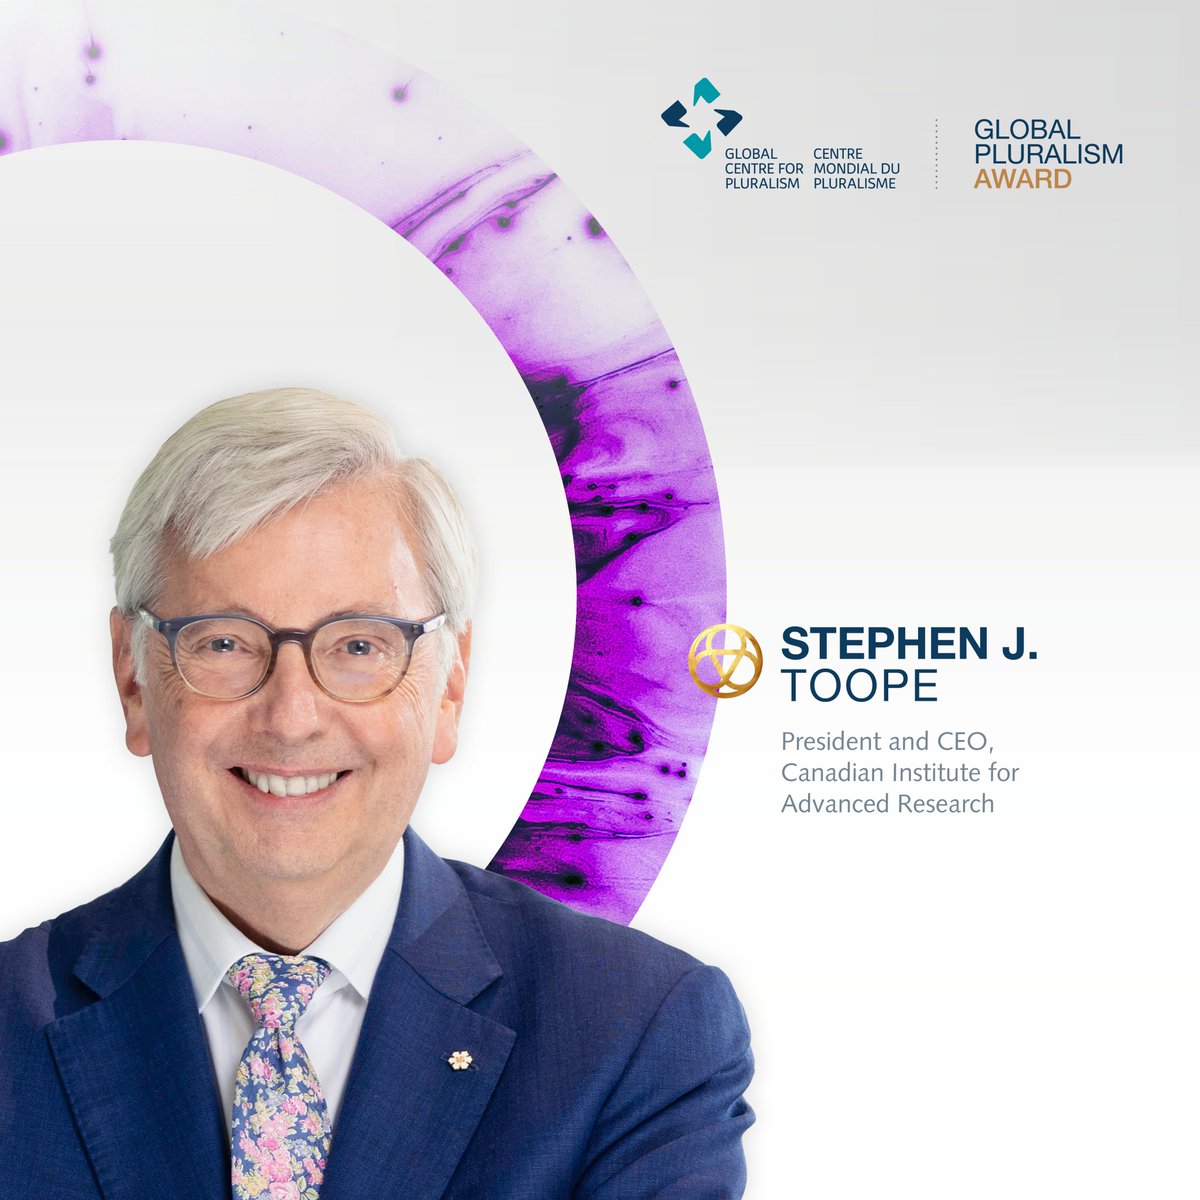 ✨ We're honored to have Dr. Stephen J. Toope as one of our new jurors for the 2025 #GlobalPluralismAward! 🎉
'The global research community recognizes the great need for pluralism as a catalyst for top quality research and positive change. Our world needs organizations and